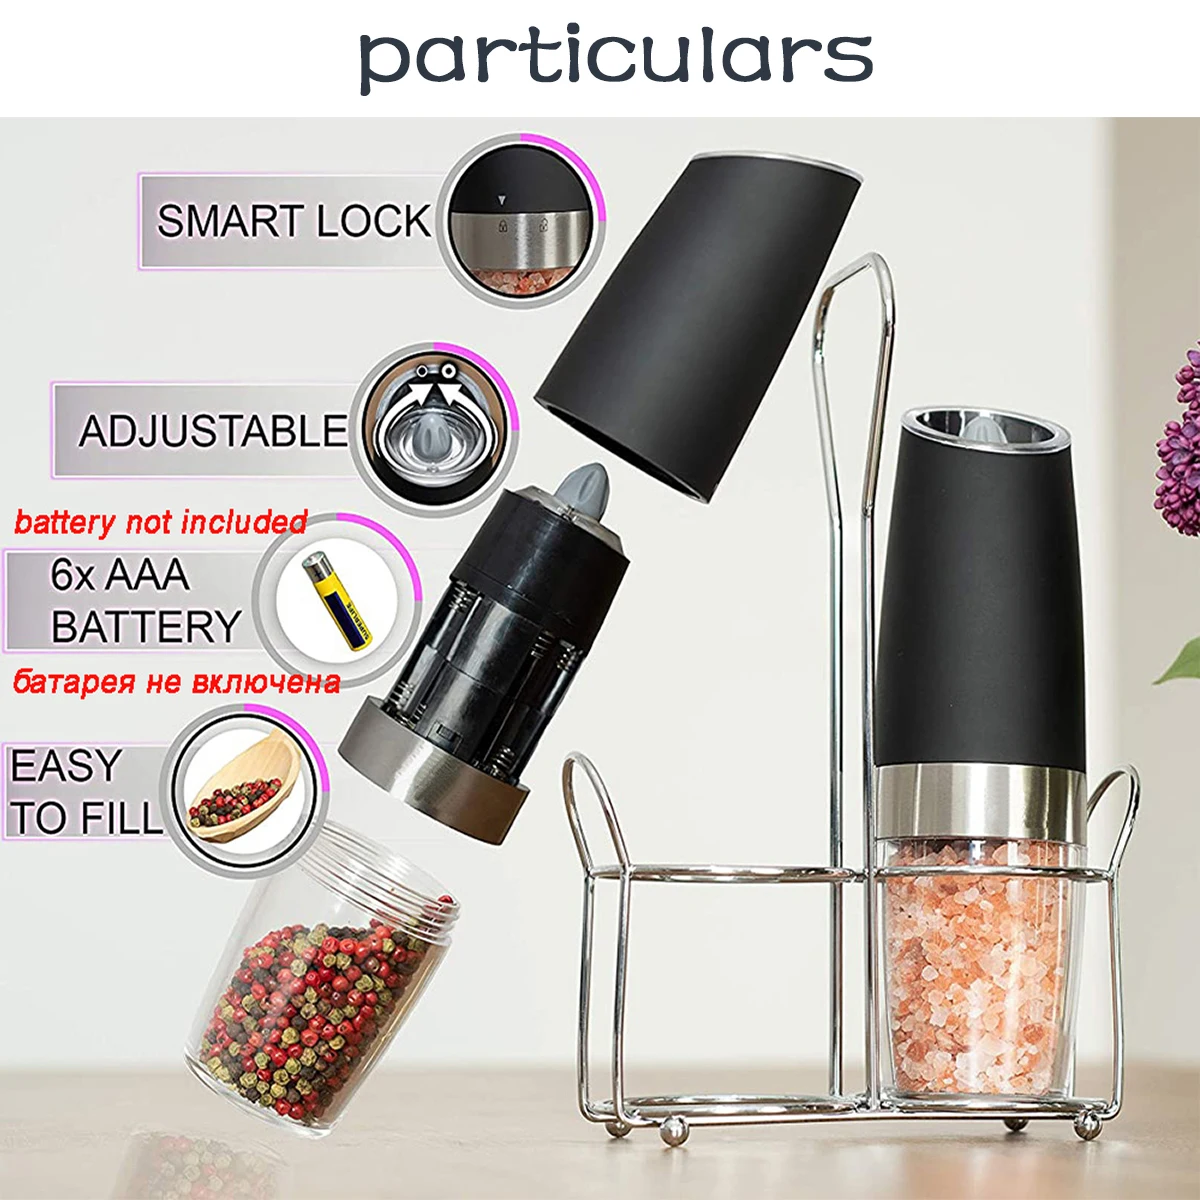 Electric Pepper Grinder Stainless Steel Automatic Gravity Shaker Salt Pepper Grinder Spice Mills Grinding Tools Kitchen Gadgets